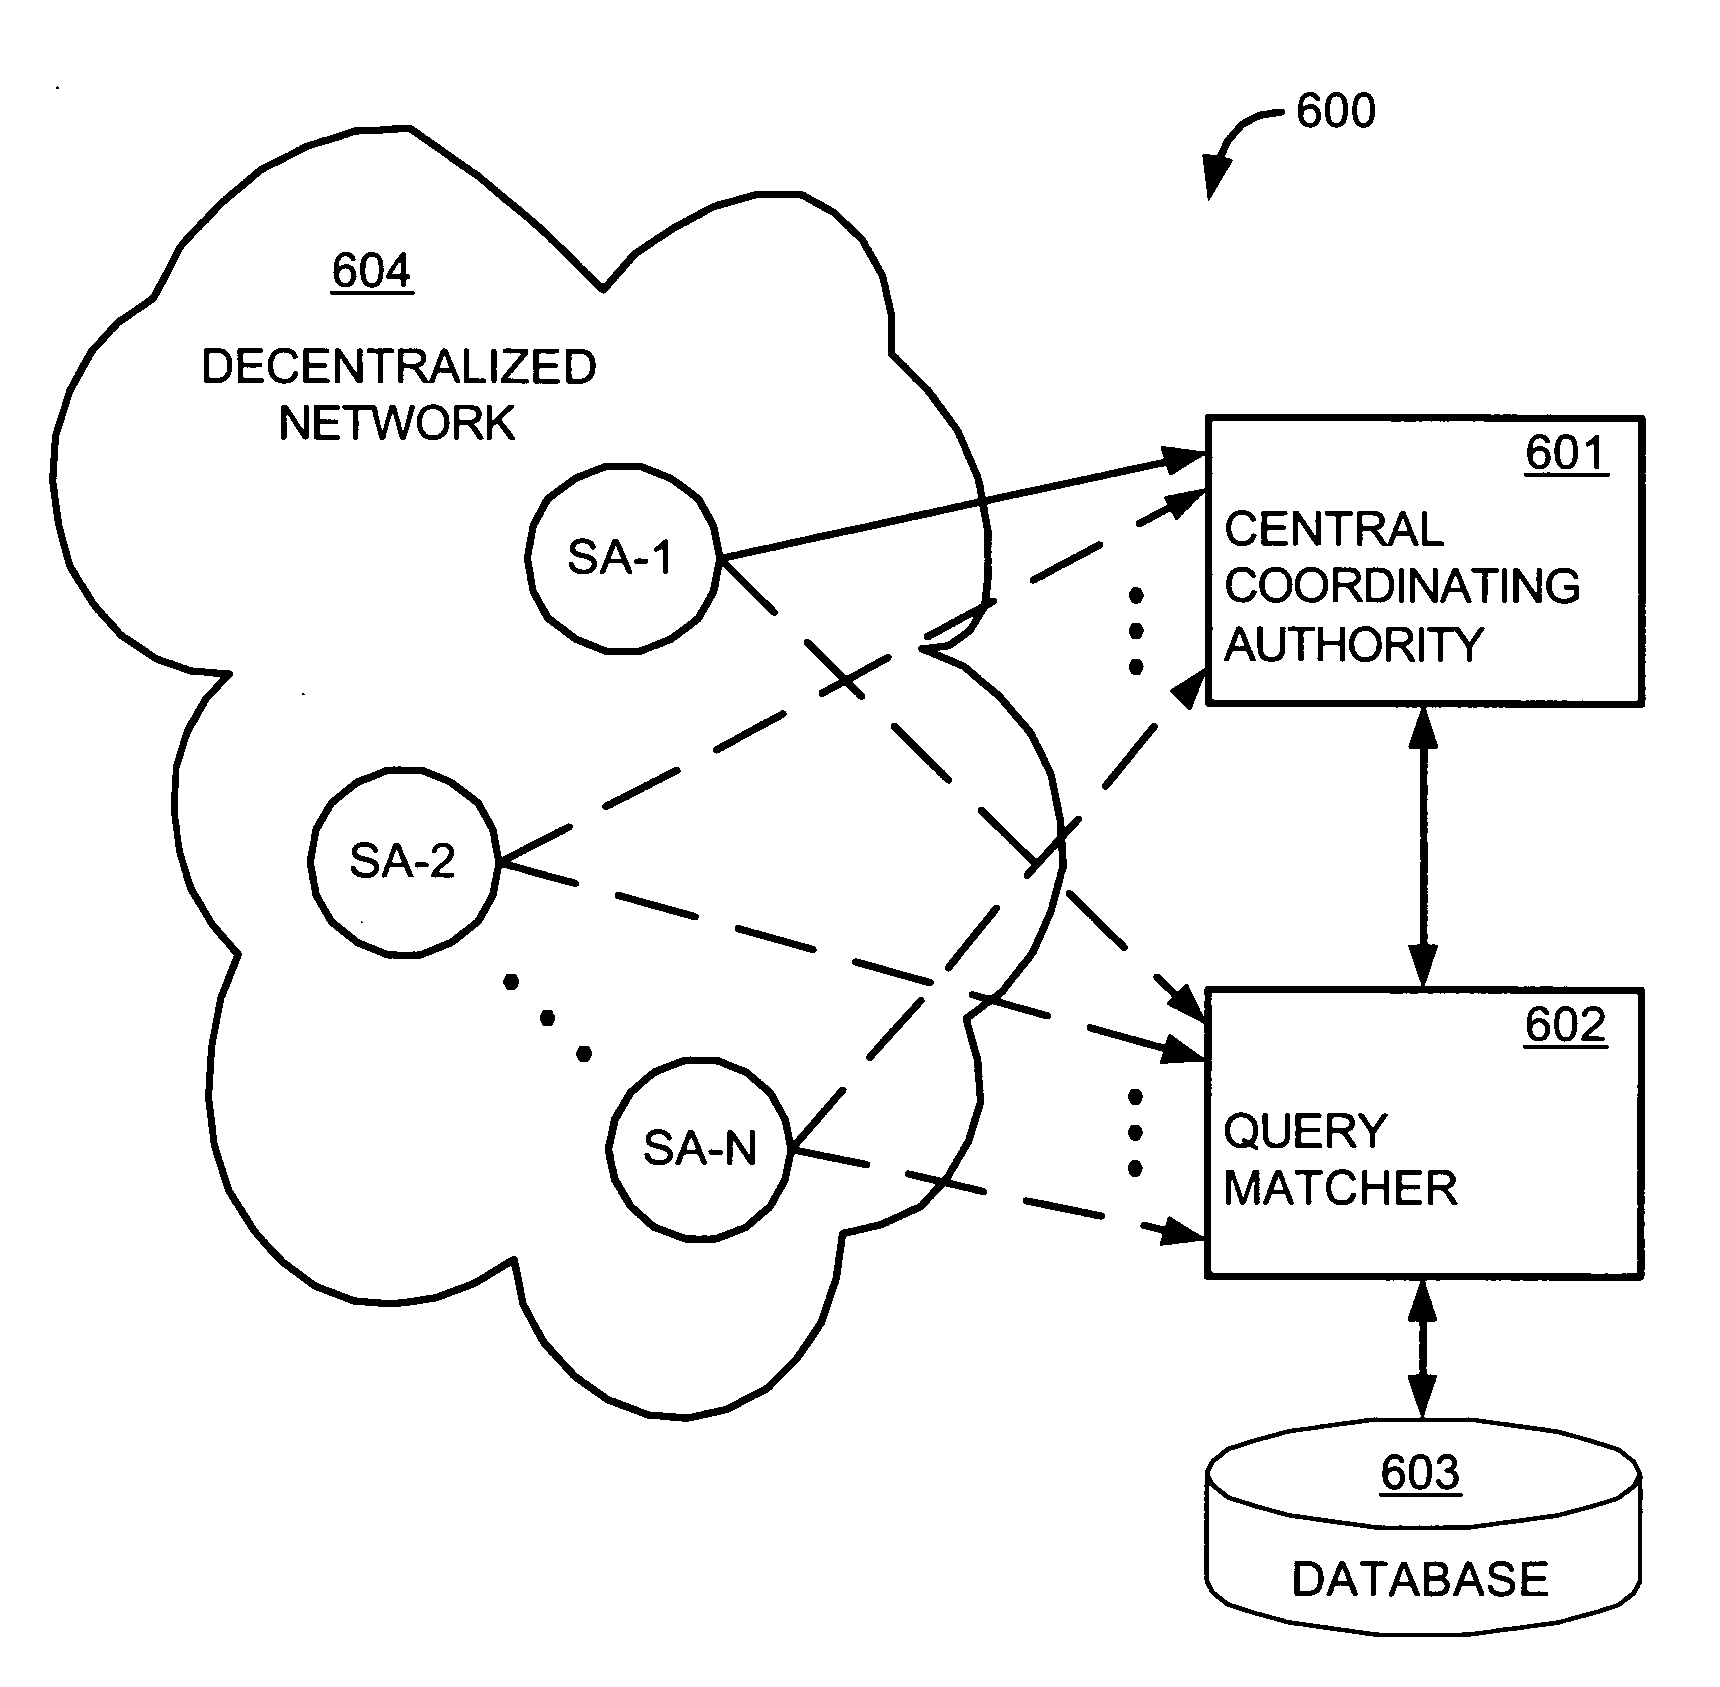 Interdiction of unauthorized copying in a decentralized network